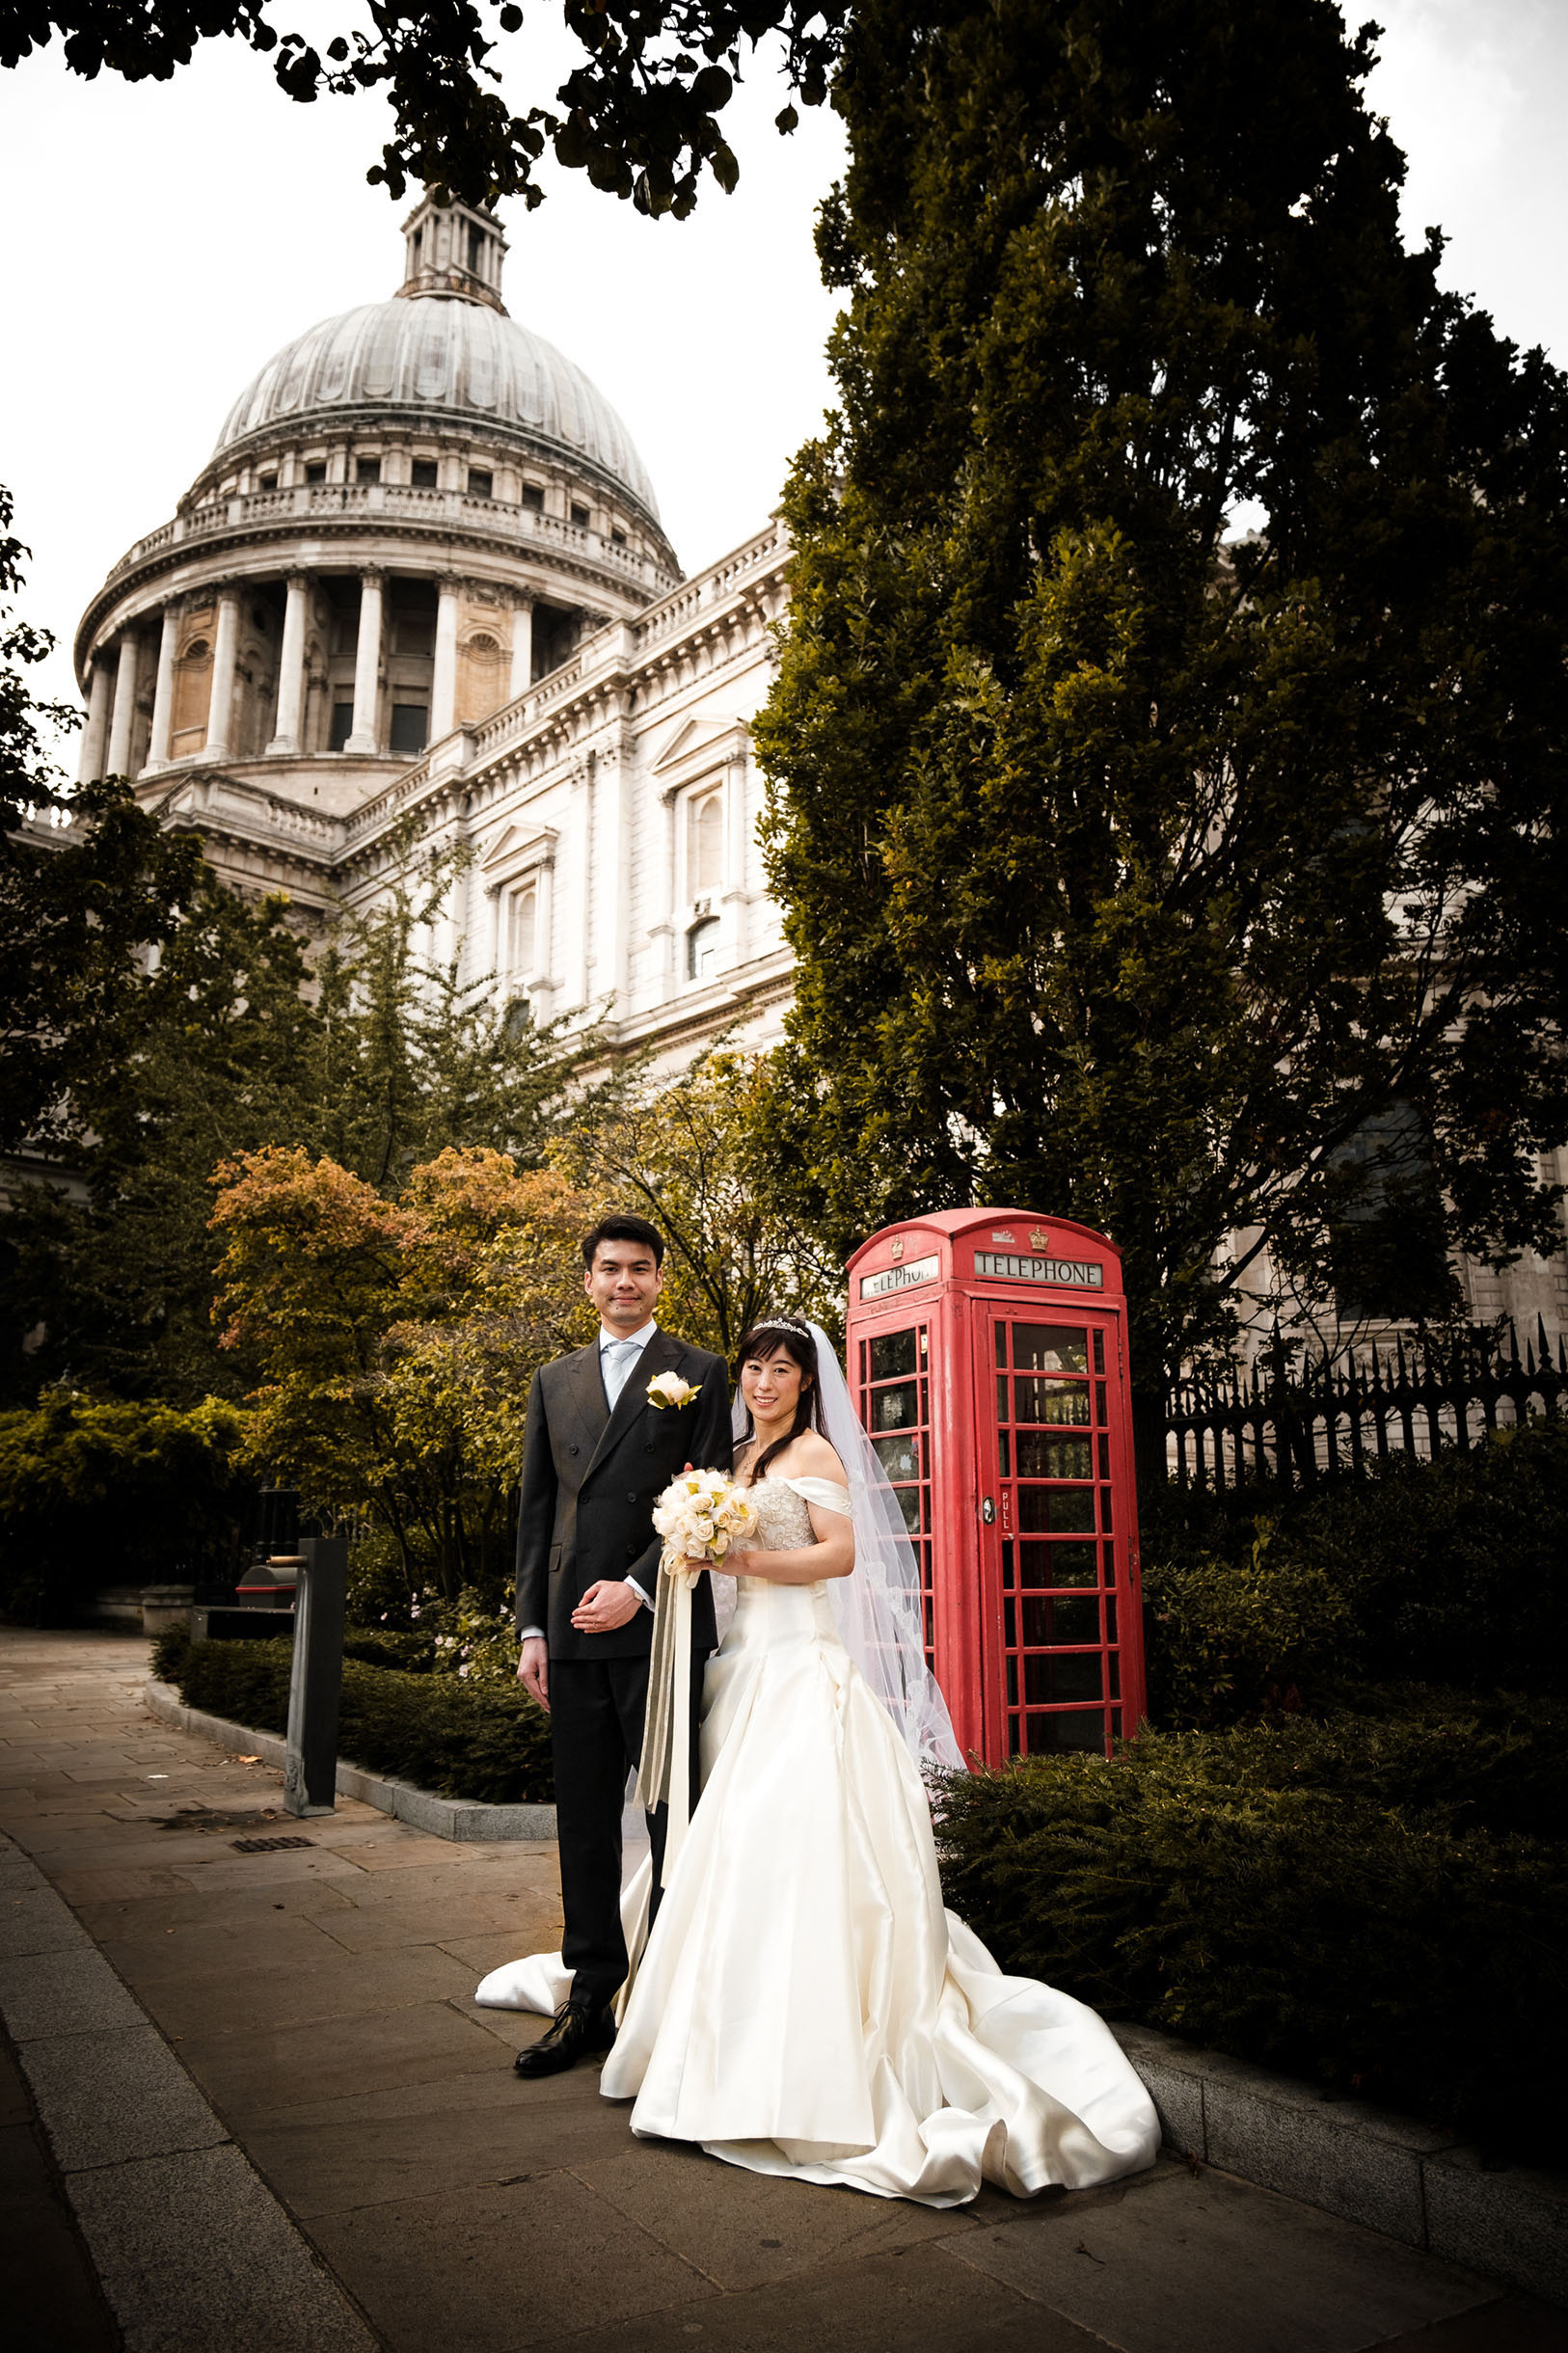 An image of a newly wed couple in front of a classic British red phone booth, St Paul's cathedral is seen on the background.